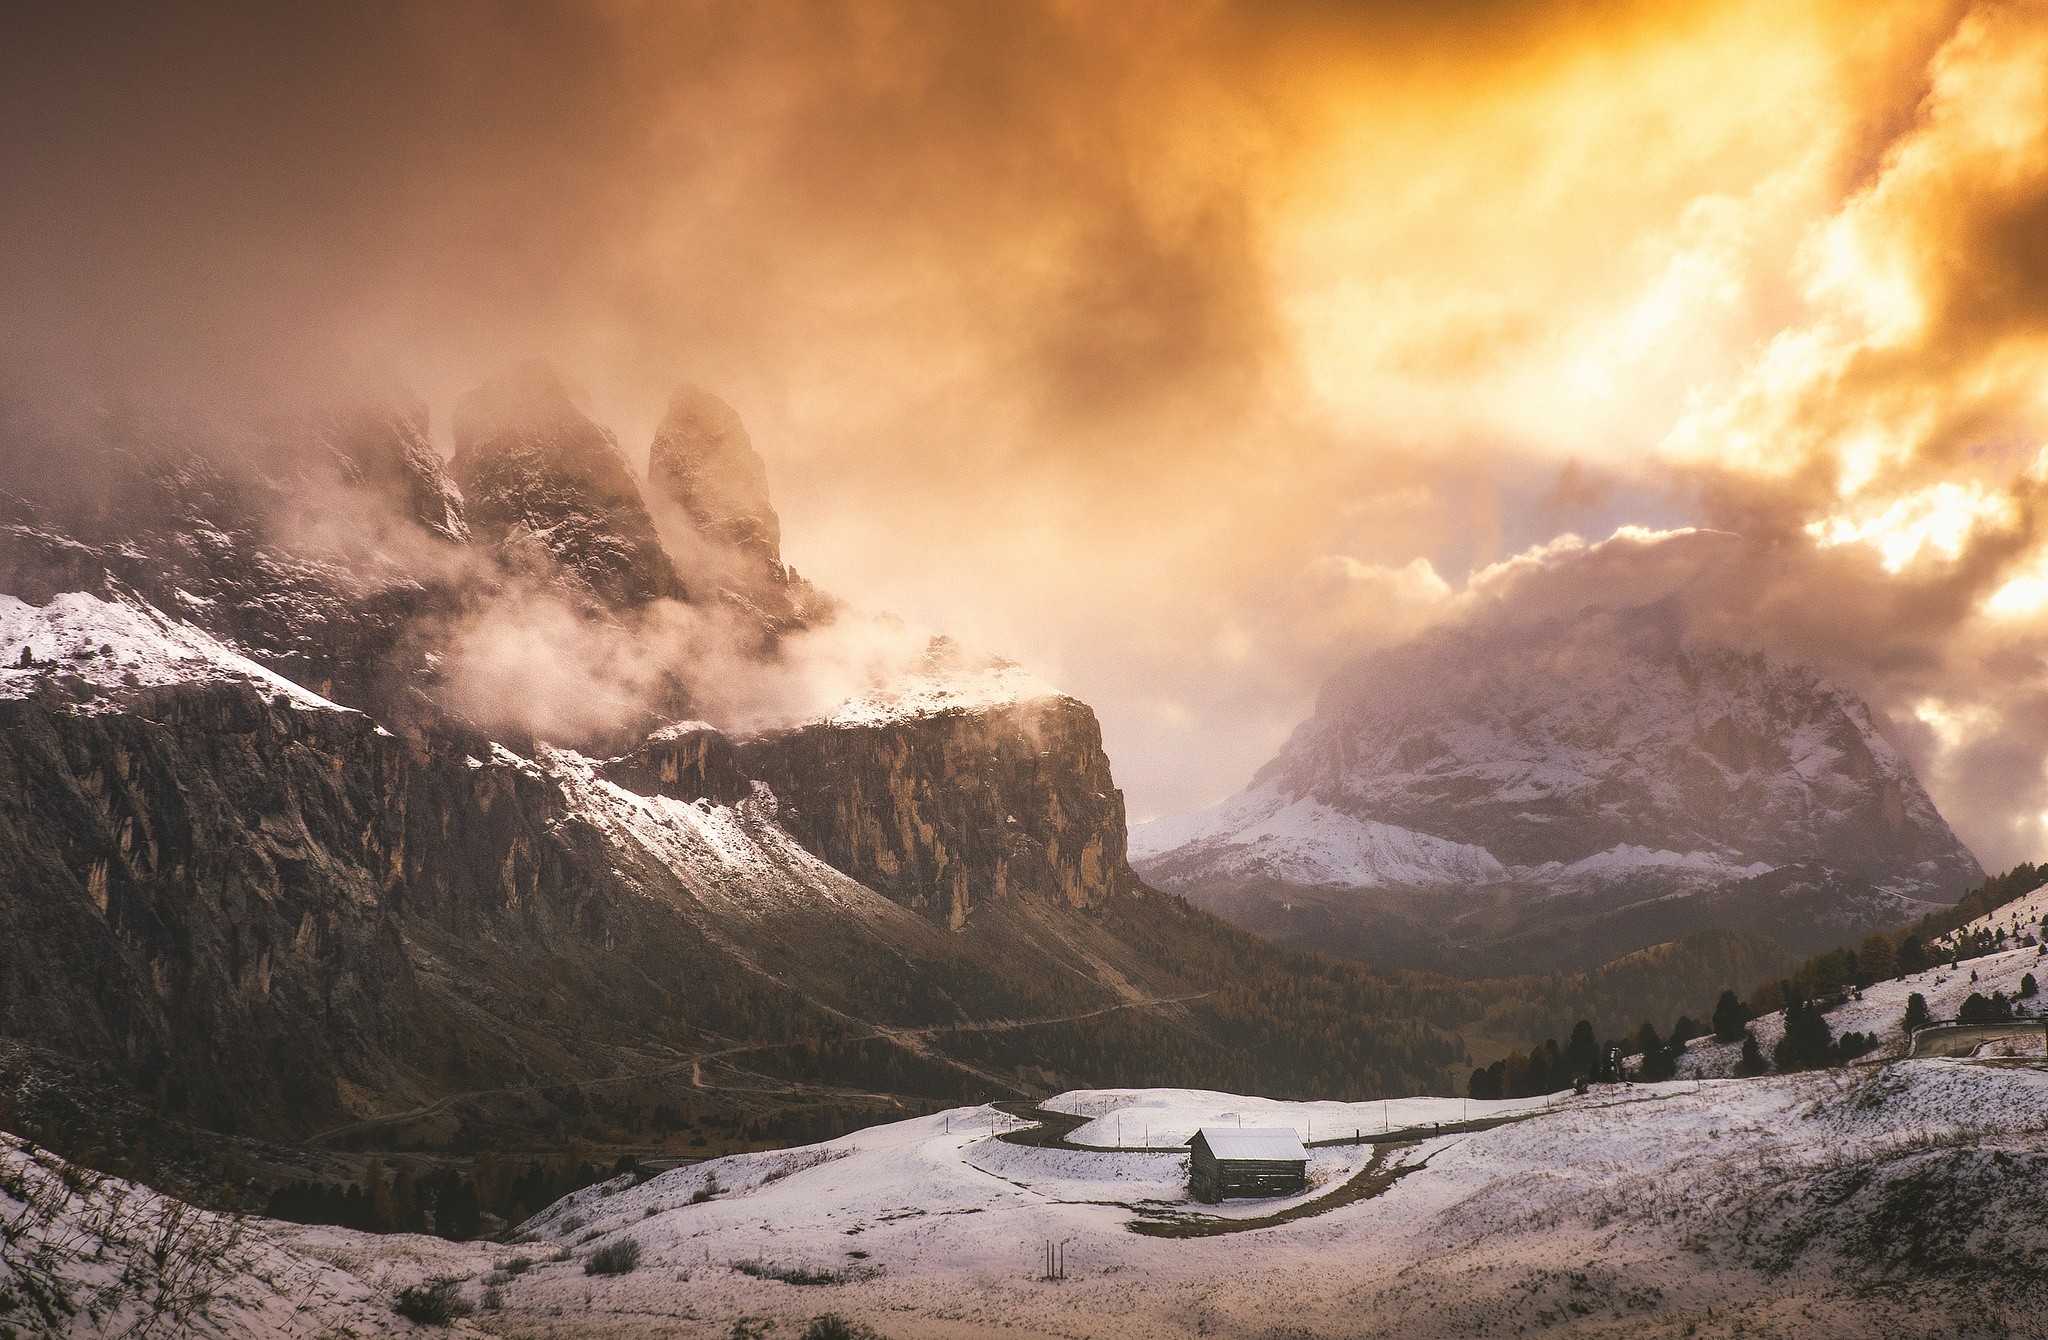 General 2048x1340 nature landscape winter cabin mountains sunlight clouds Alps snow trees Italy cold outdoors orange sky sky